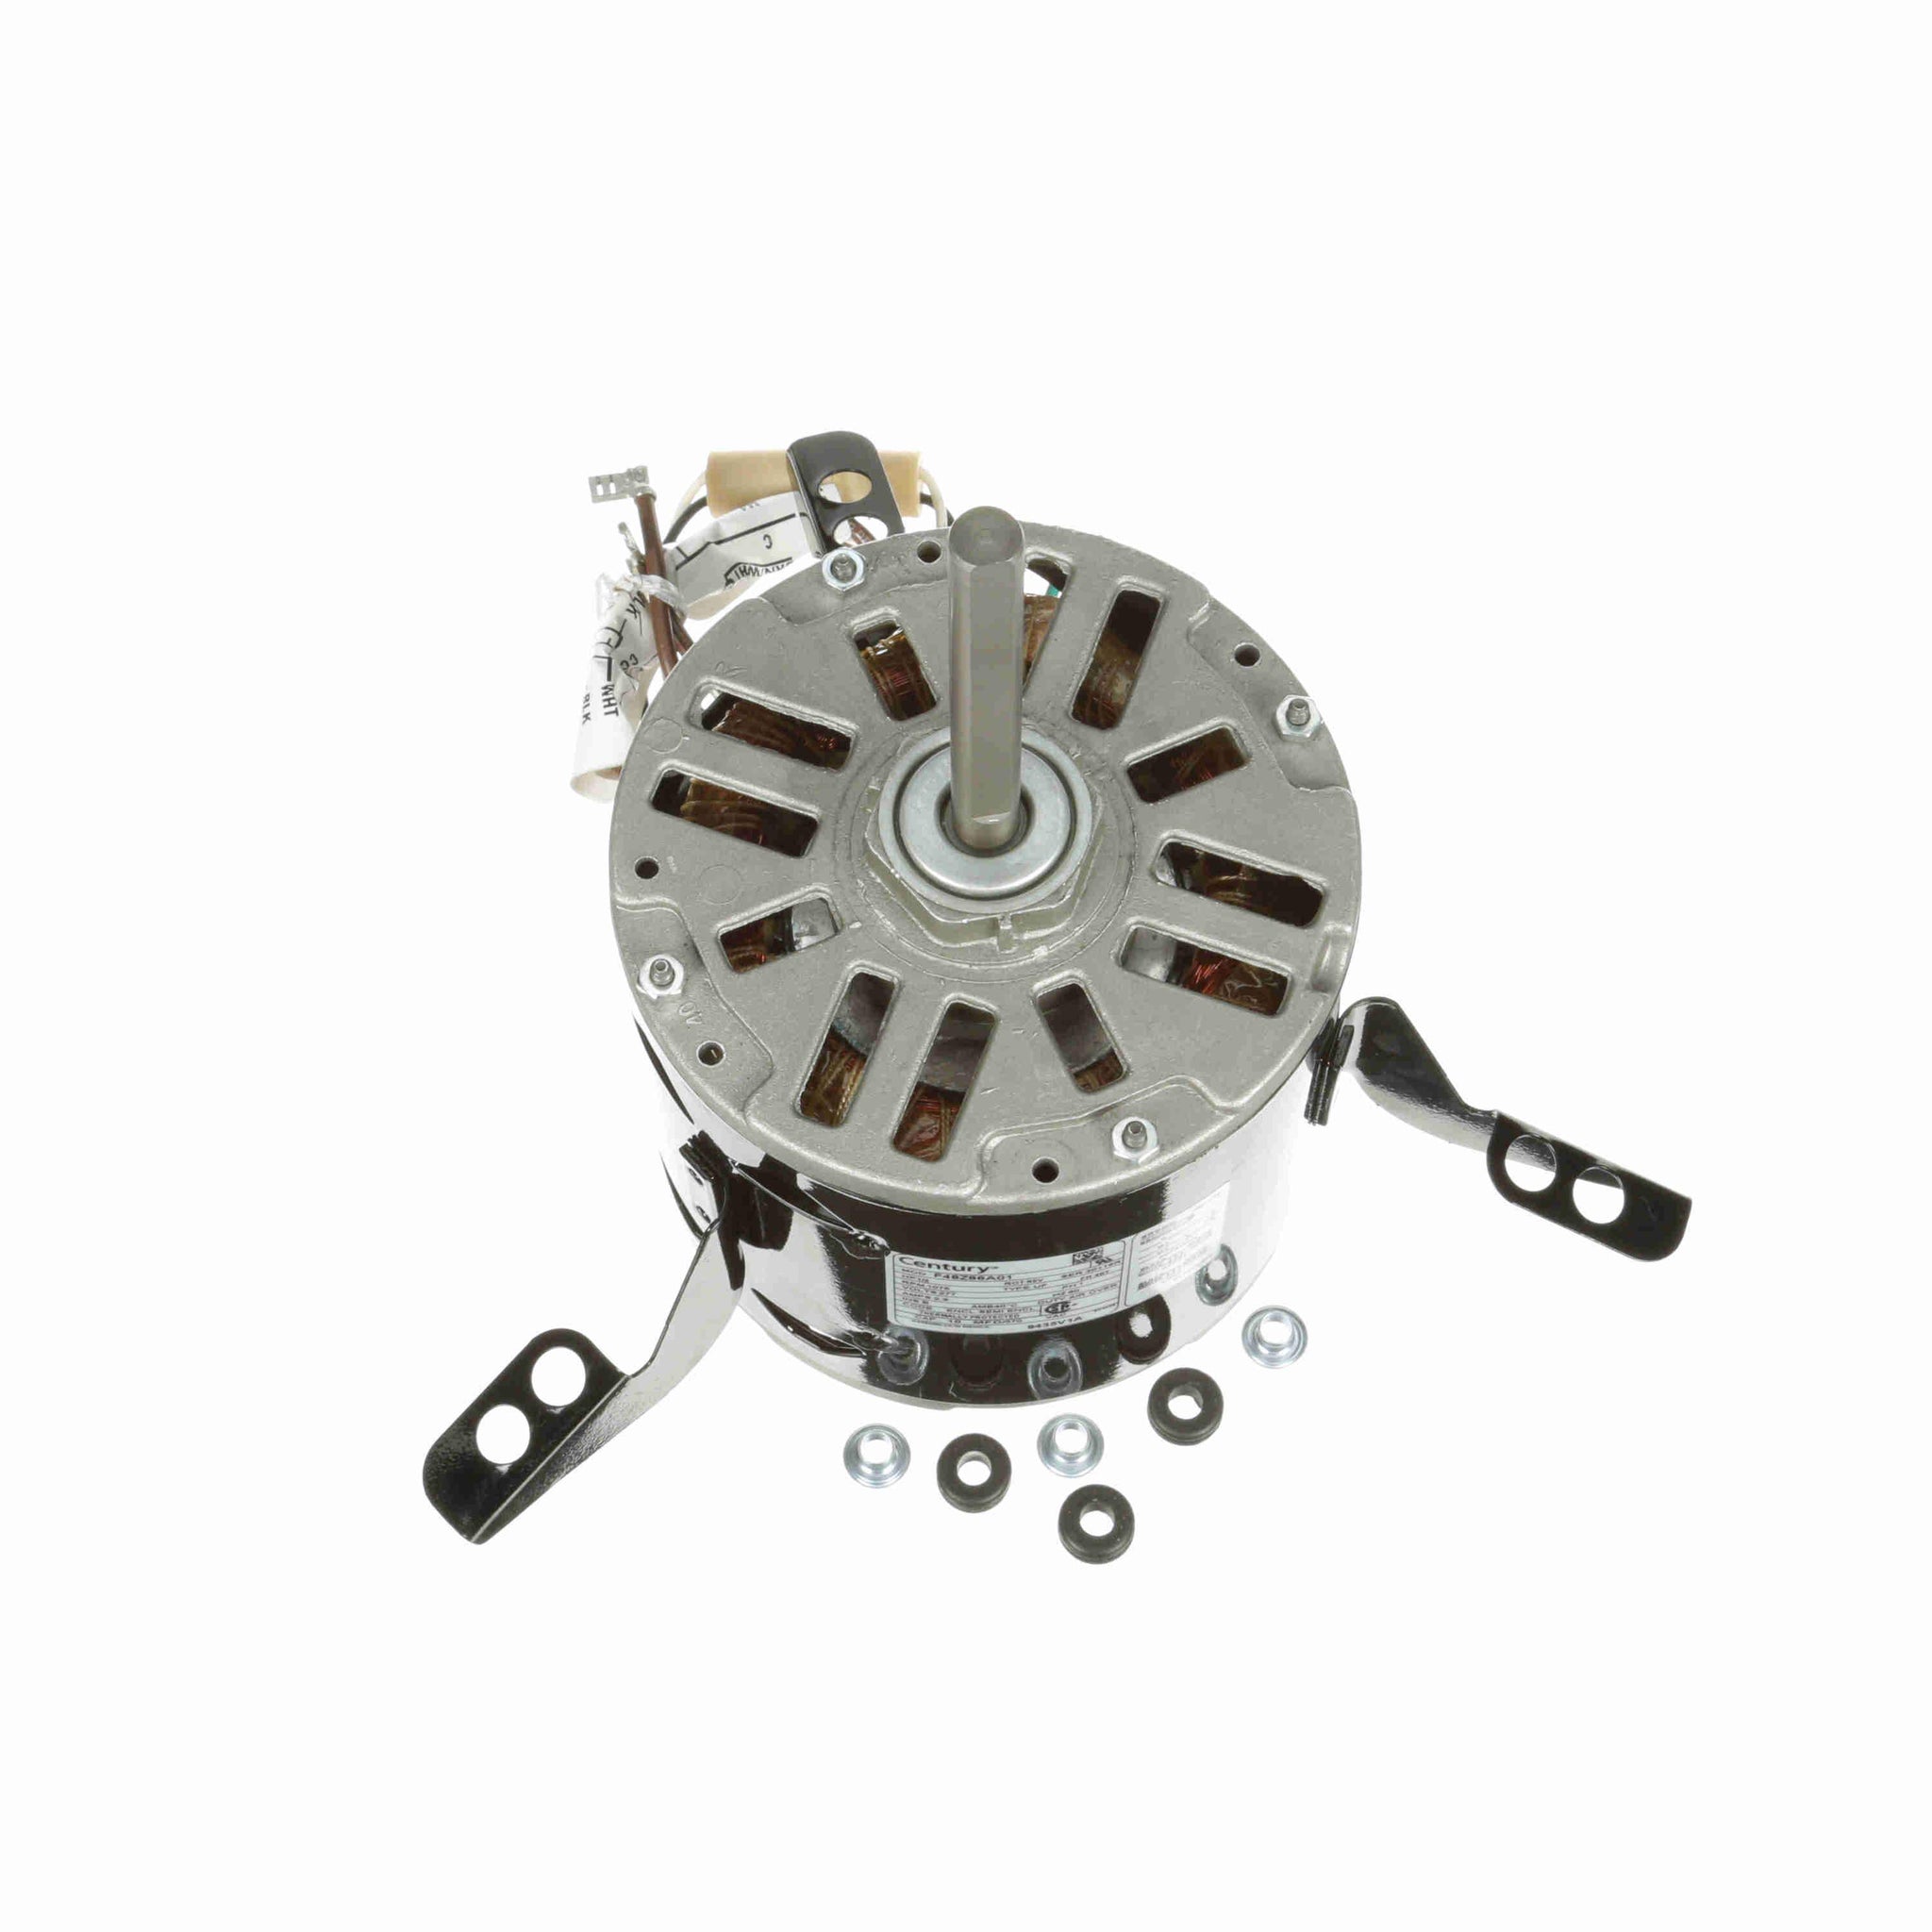 9435V1A -  1/2 HP OEM Replacement Motor, 1075 RPM, 277 Volts, 48 Frame, Semi Enclosed - Hardware & Moreee